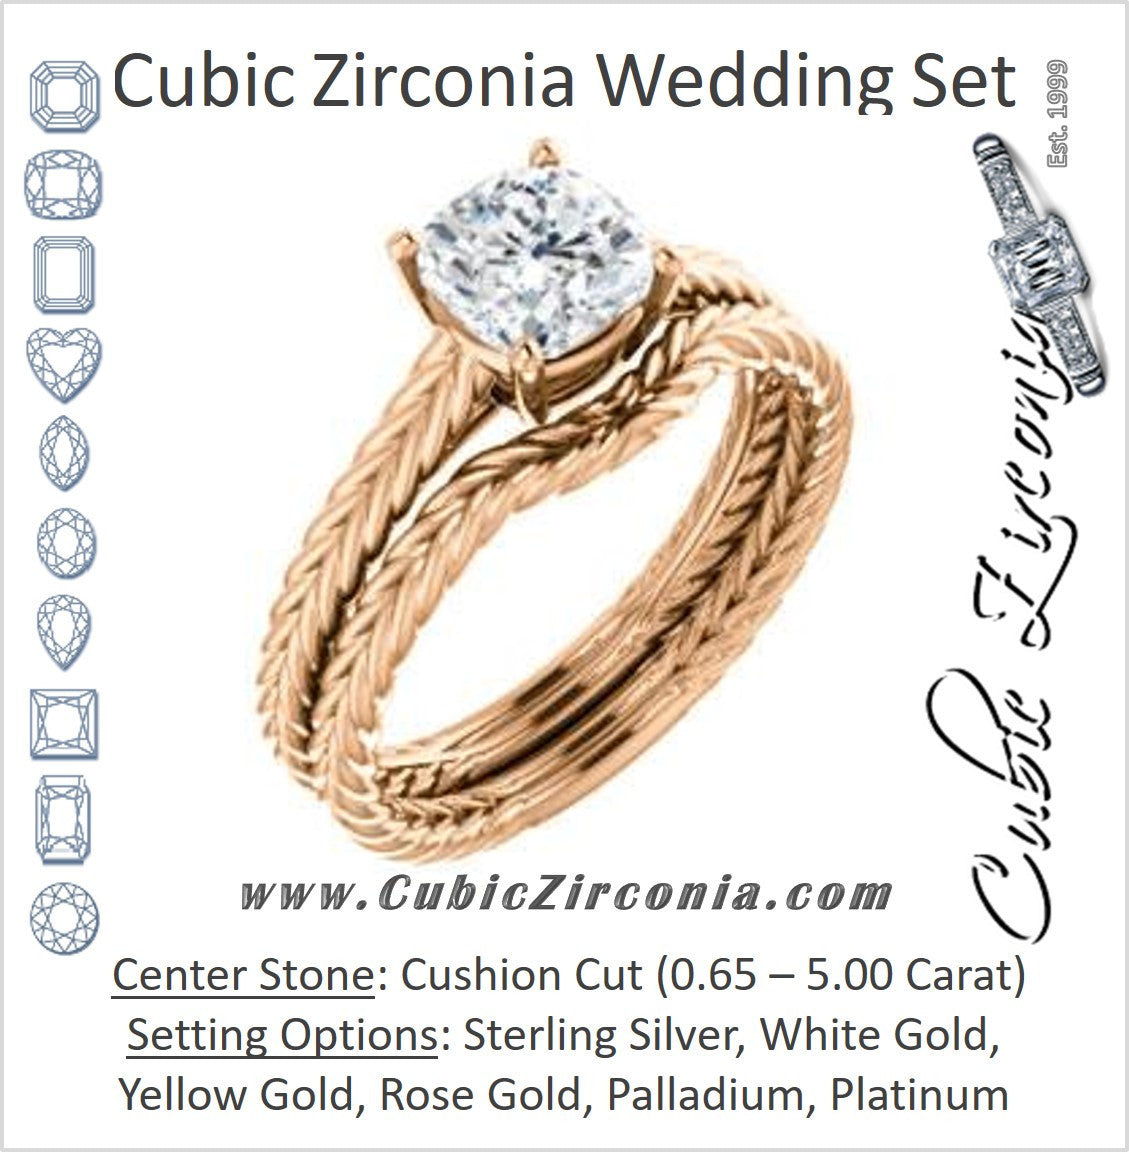 CZ Wedding Set, featuring The Florence engagement ring (Customizable Cathedral-set Cushion Cut Solitaire with Vintage Braided Metal Band)